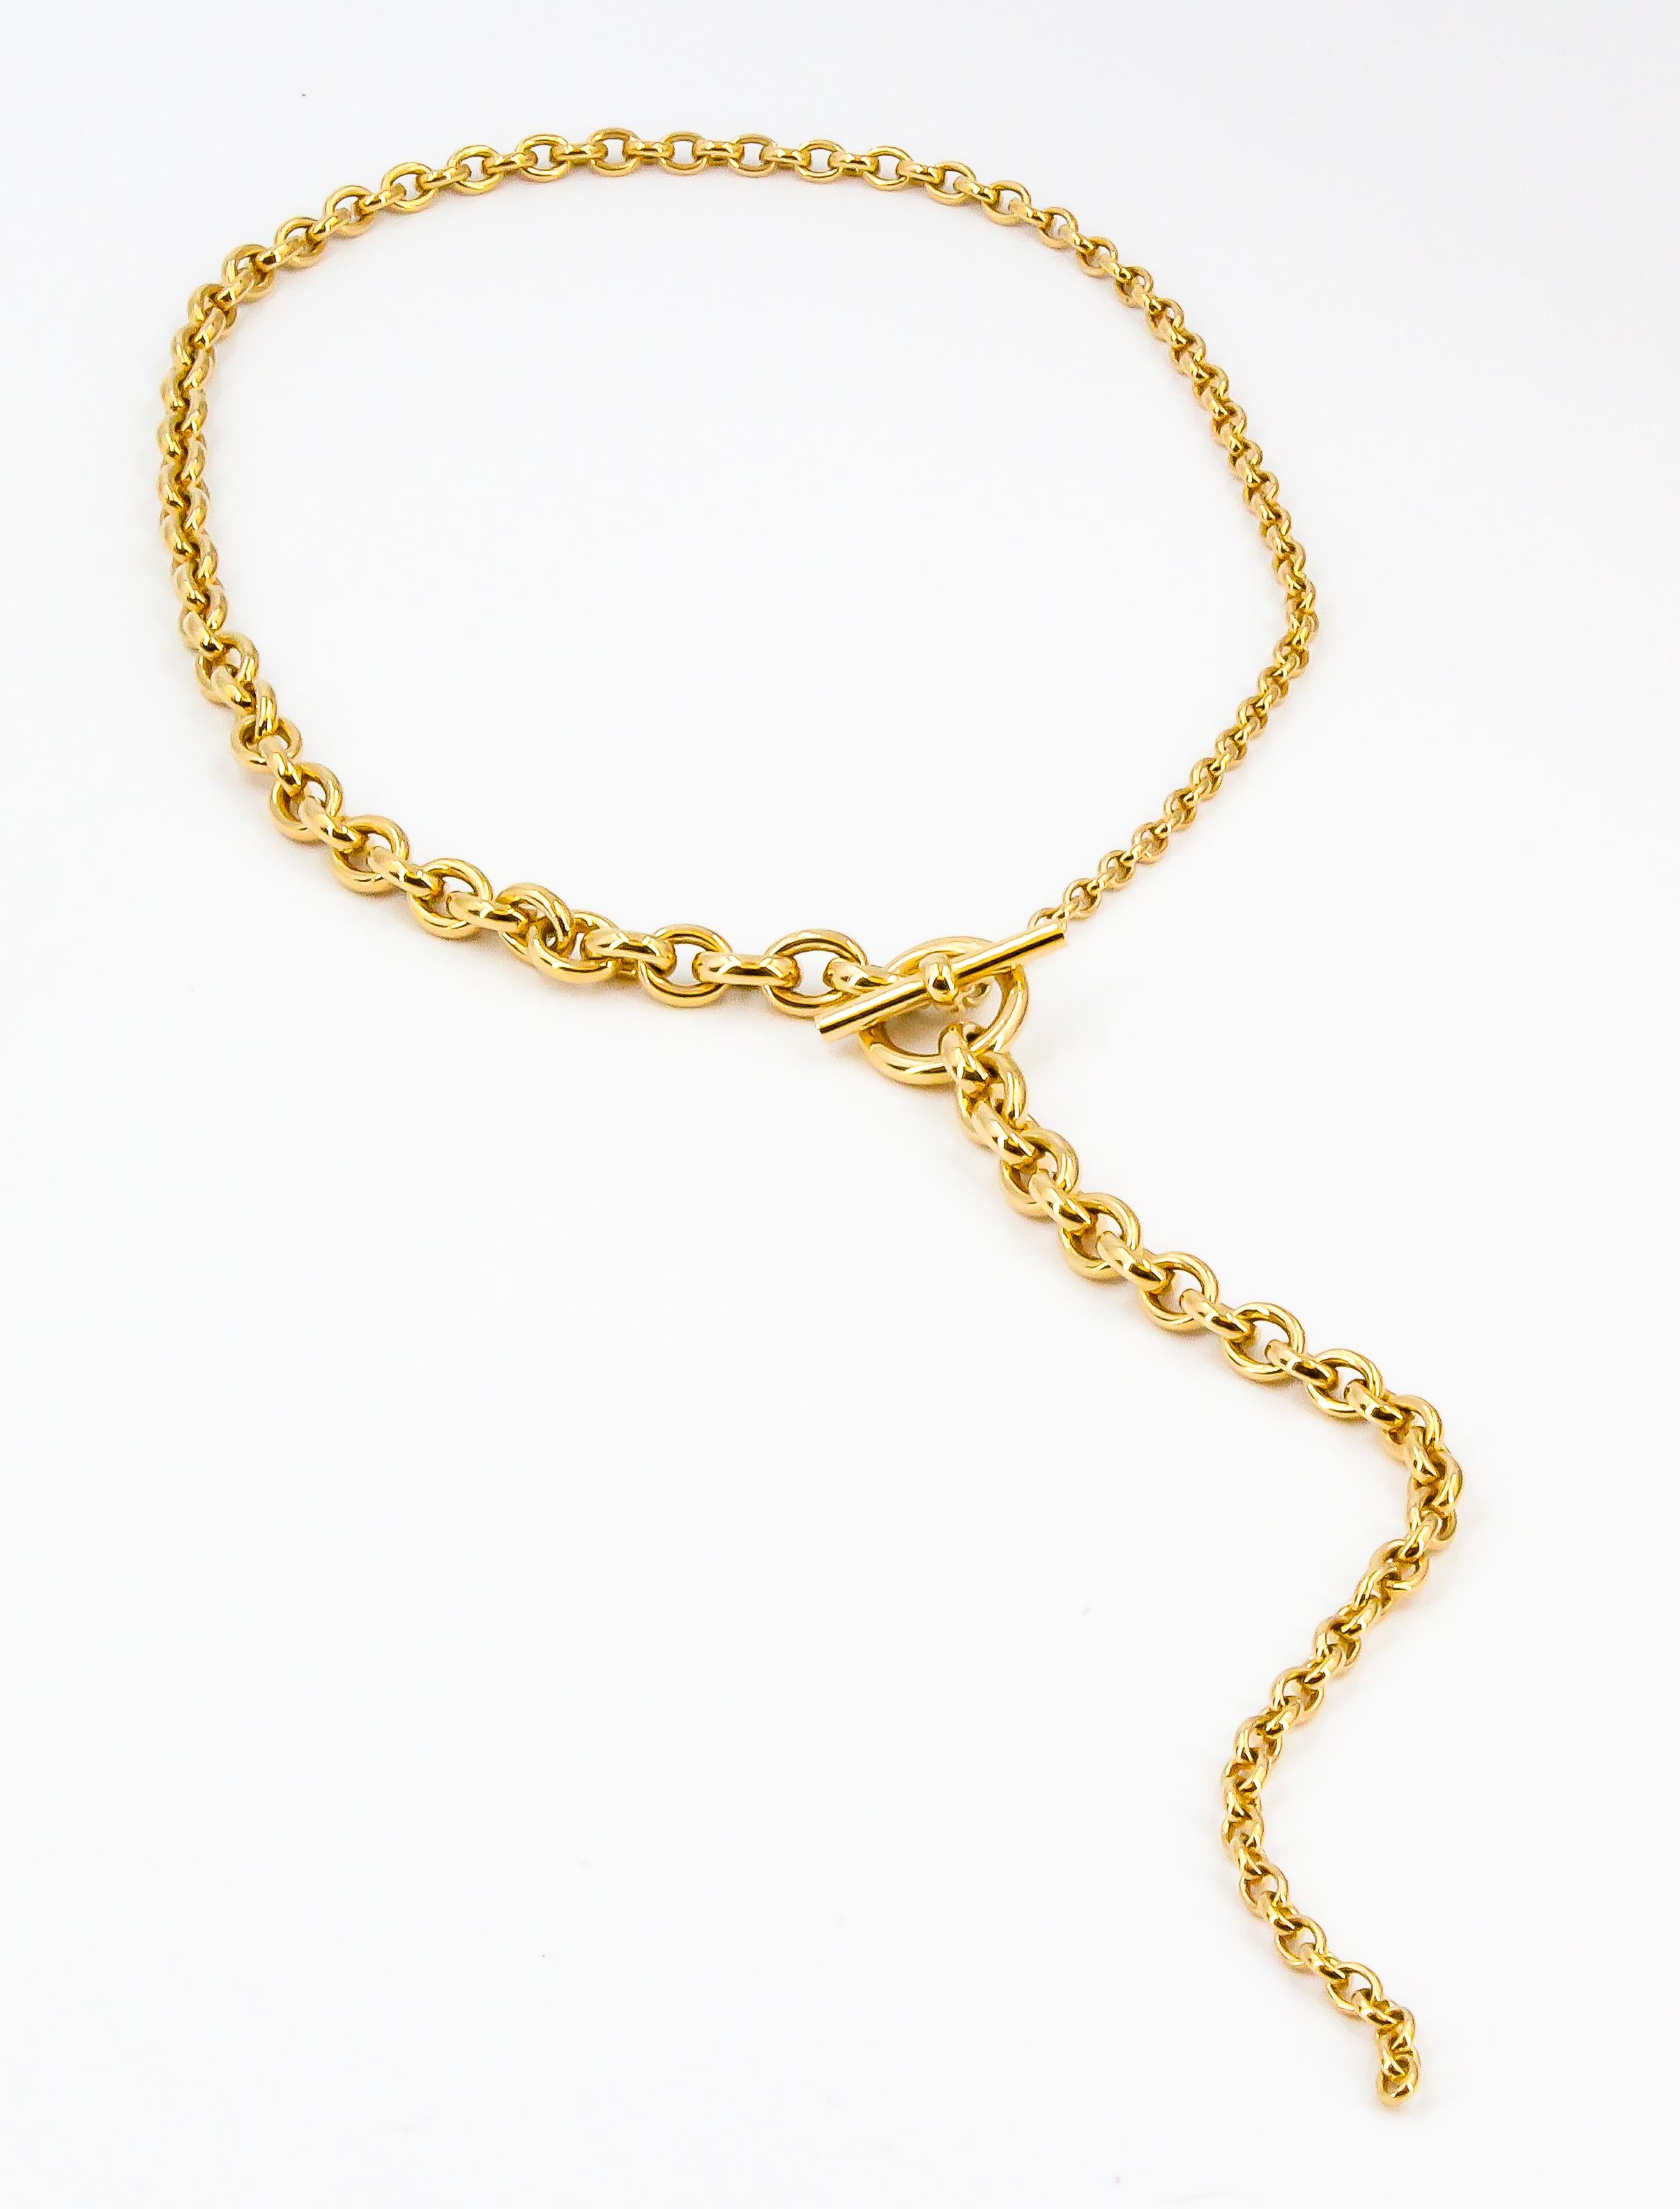 Fine  18K yellow gold link necklace from the 